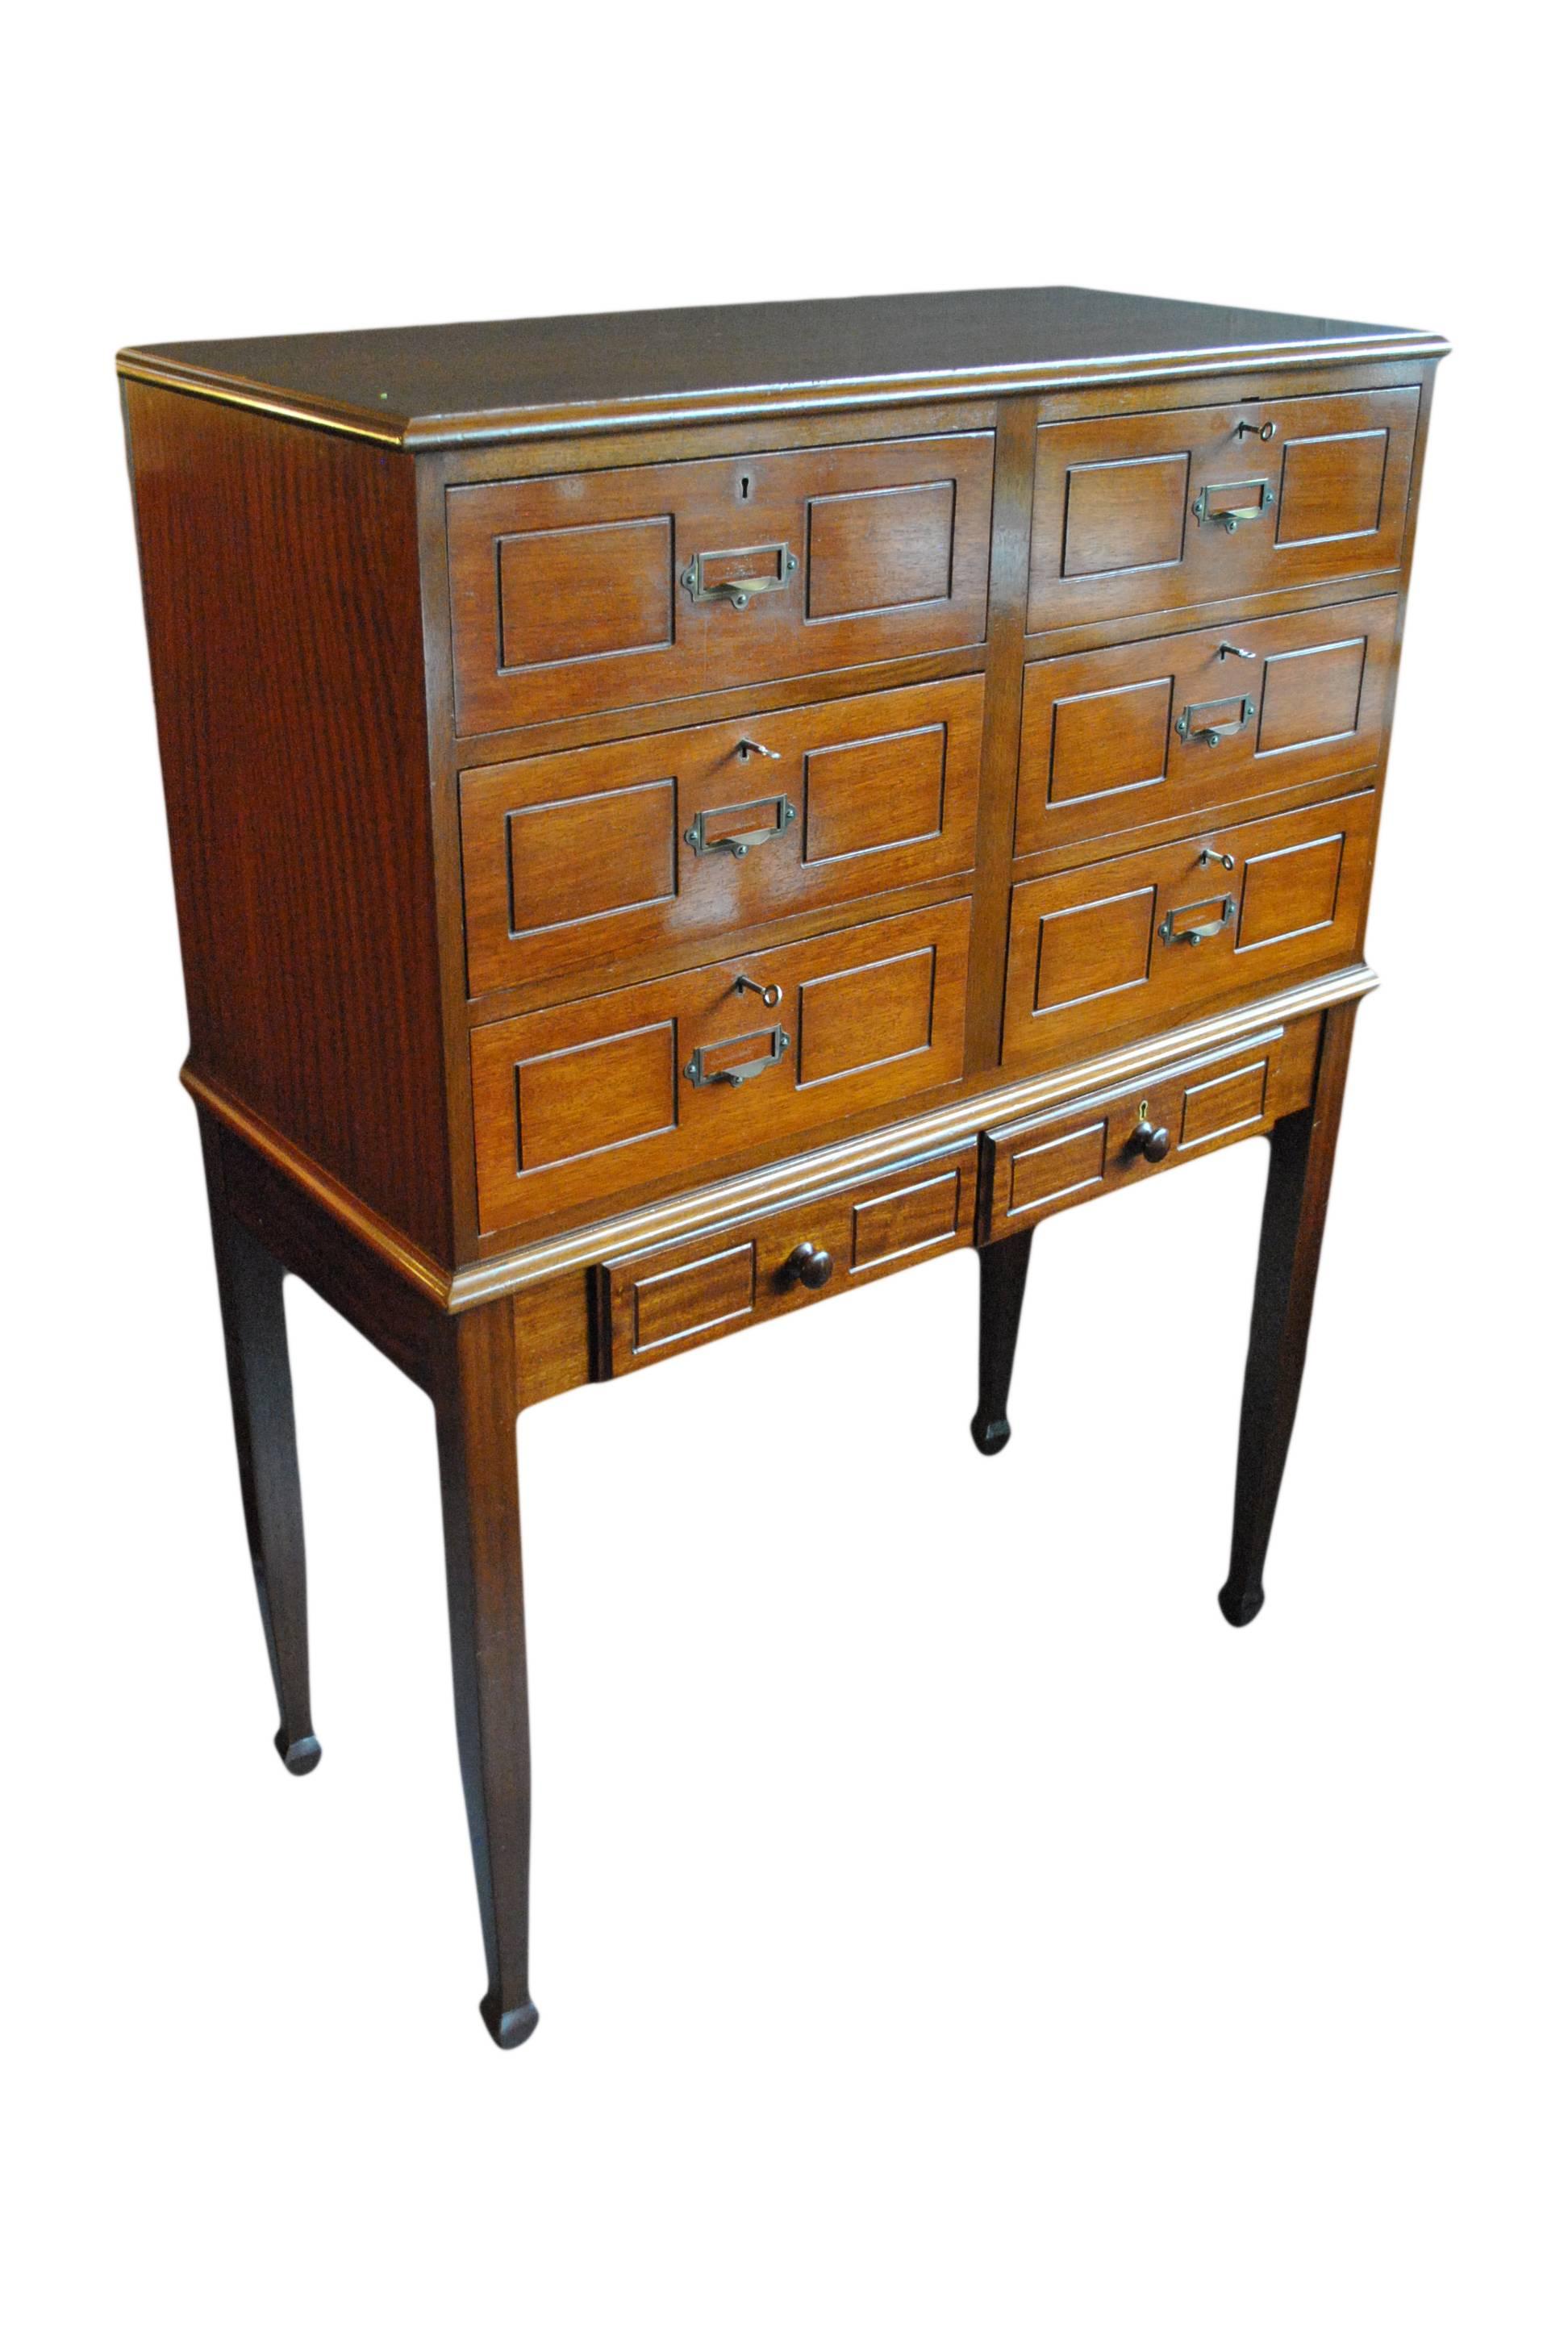 English haberdashers shop cabinet, early 20thC. Bespoke piece of mahogany furniture with a full set of locking drawers. The drawers have inner removable sections. 
In wonderful condition throughout.
